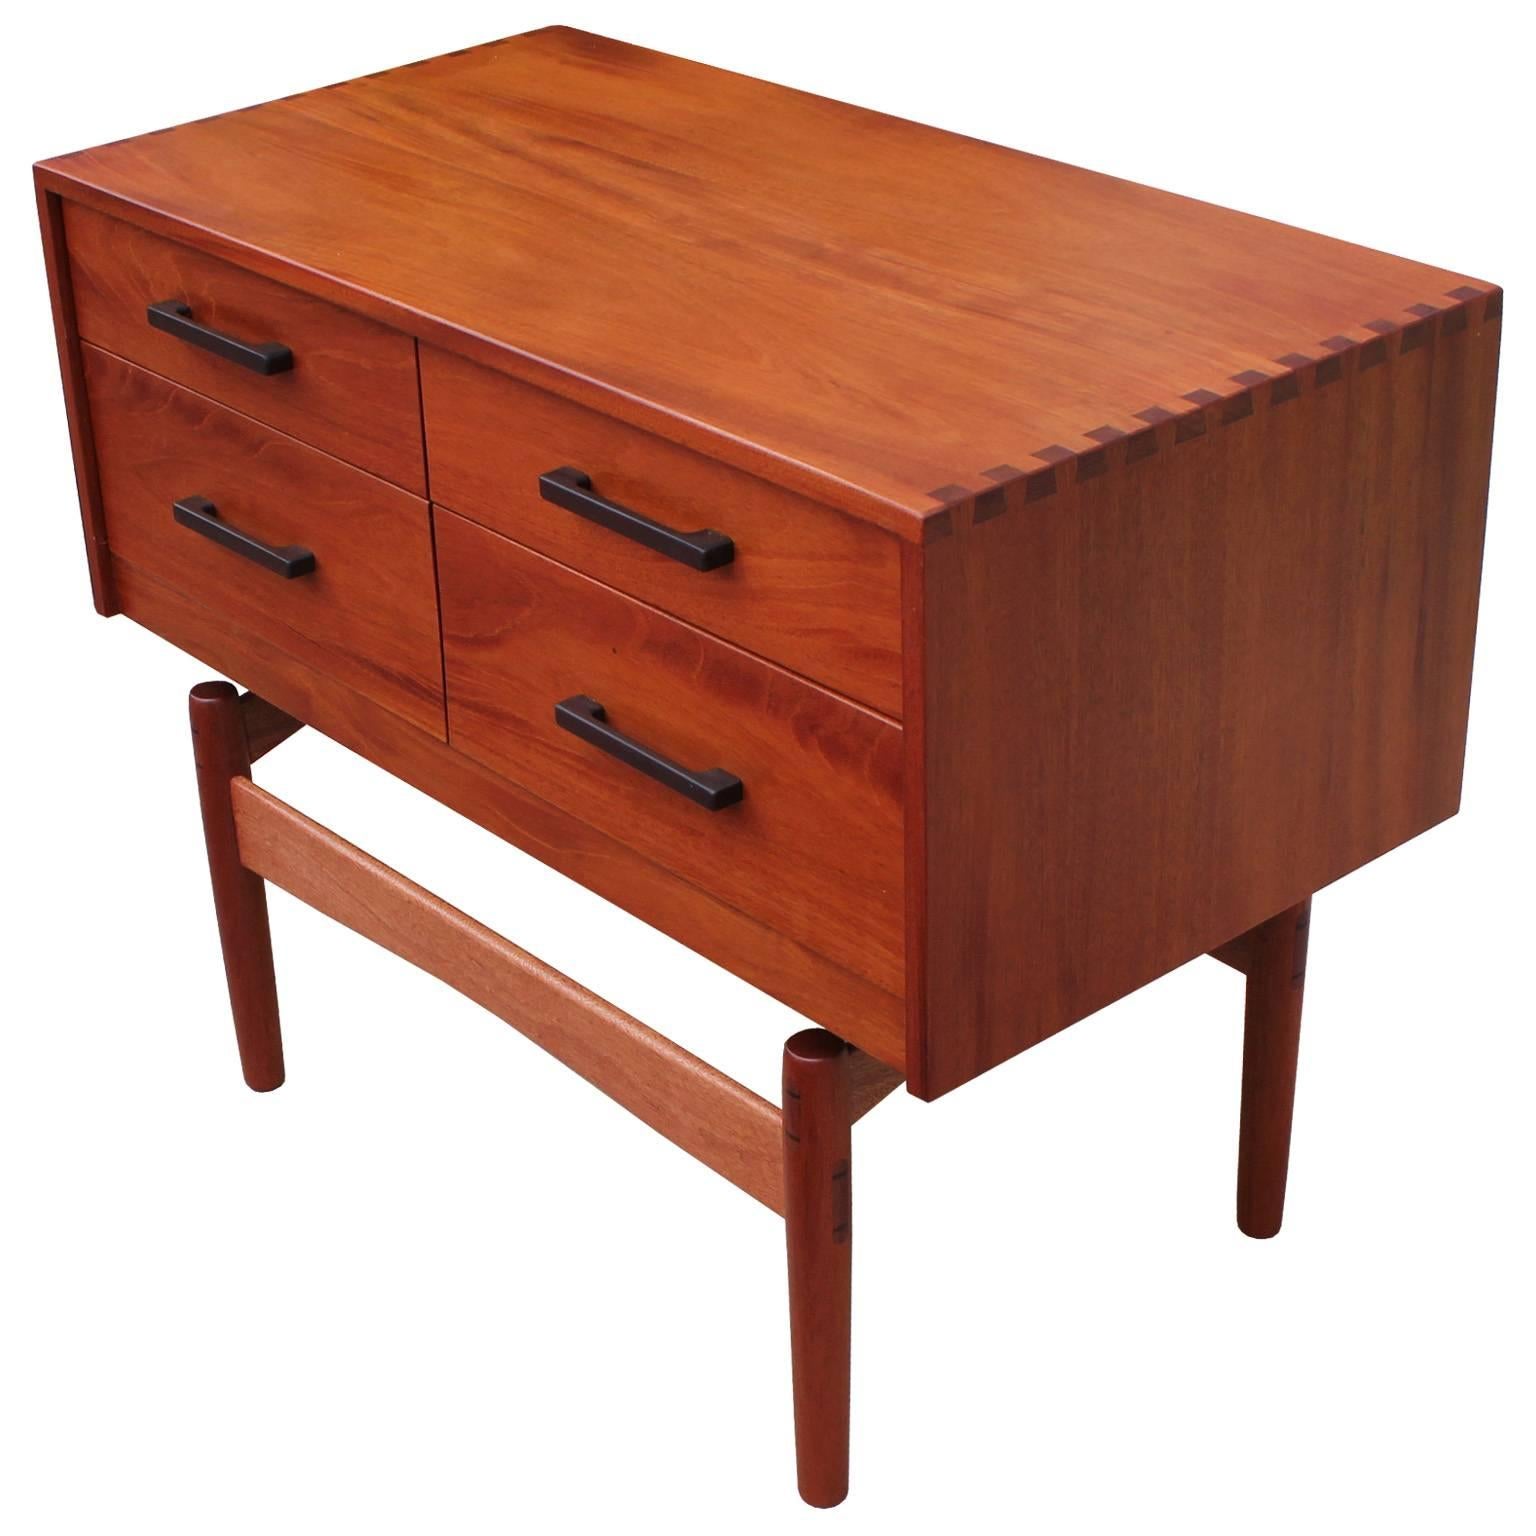 Stunning chest or dresser of excellent craftsmanship by Norm Stoeker. Table has beautiful inlaid detailing and dove tail accents. Four drawers provide storage. Excellent in a Mid-Century, Danish modern, or Scandinavian Modern interior. In the style